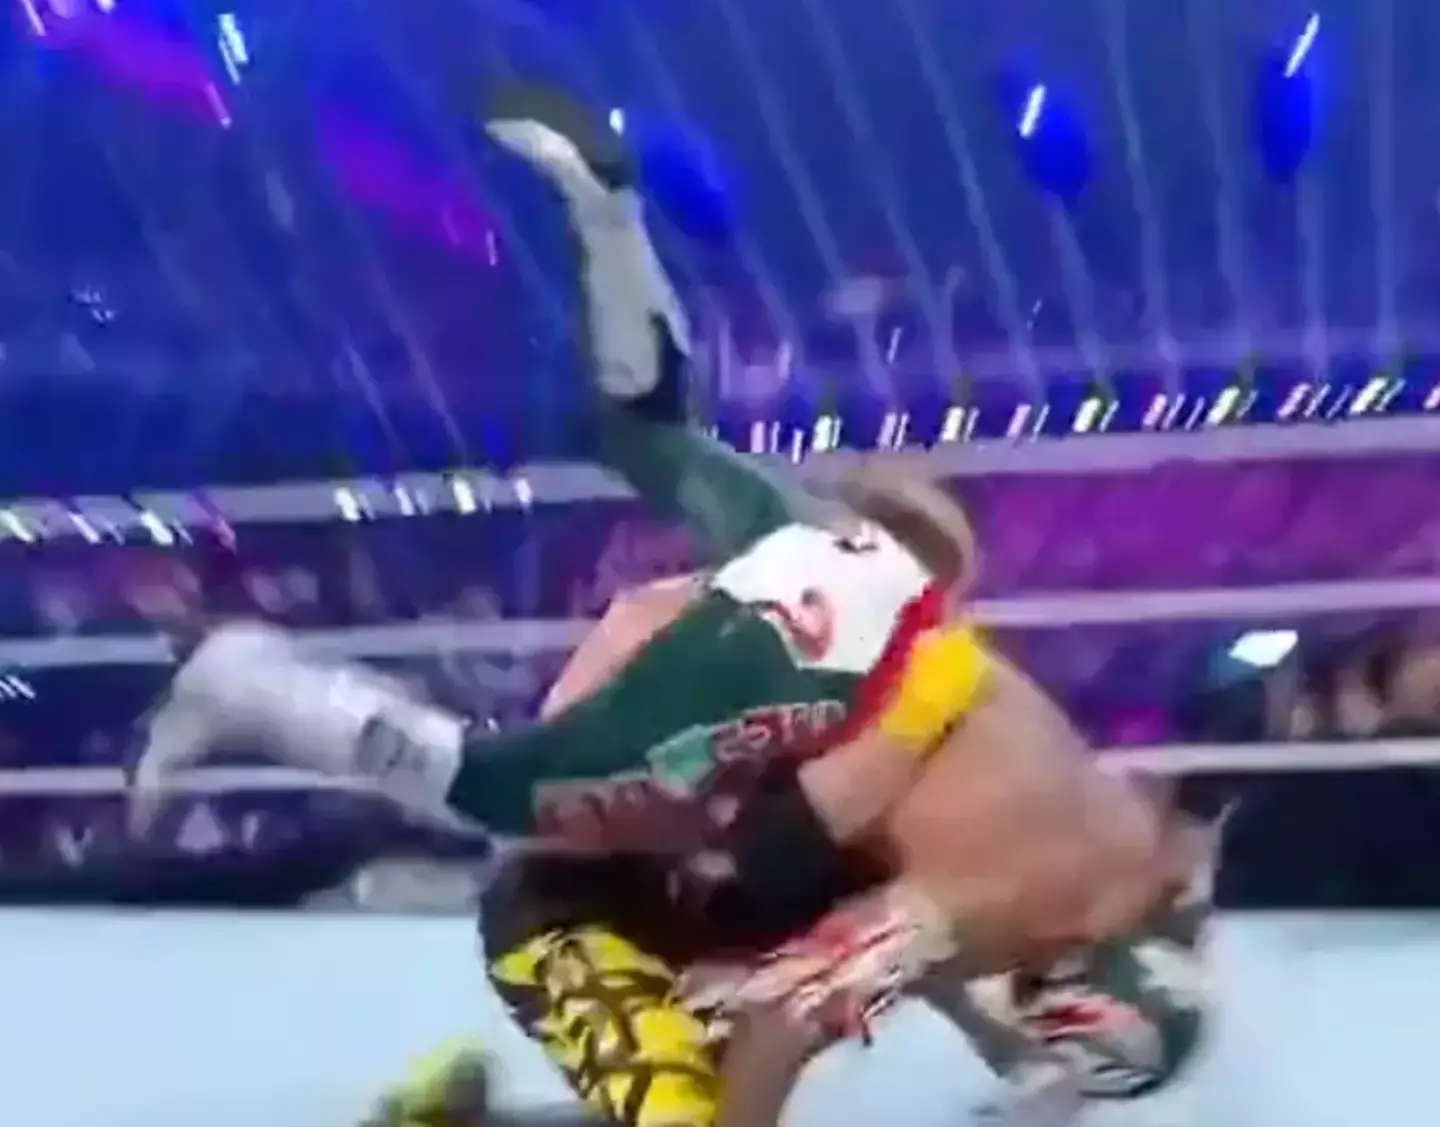 Logan Paul rushed to catch Rey Mysterio.